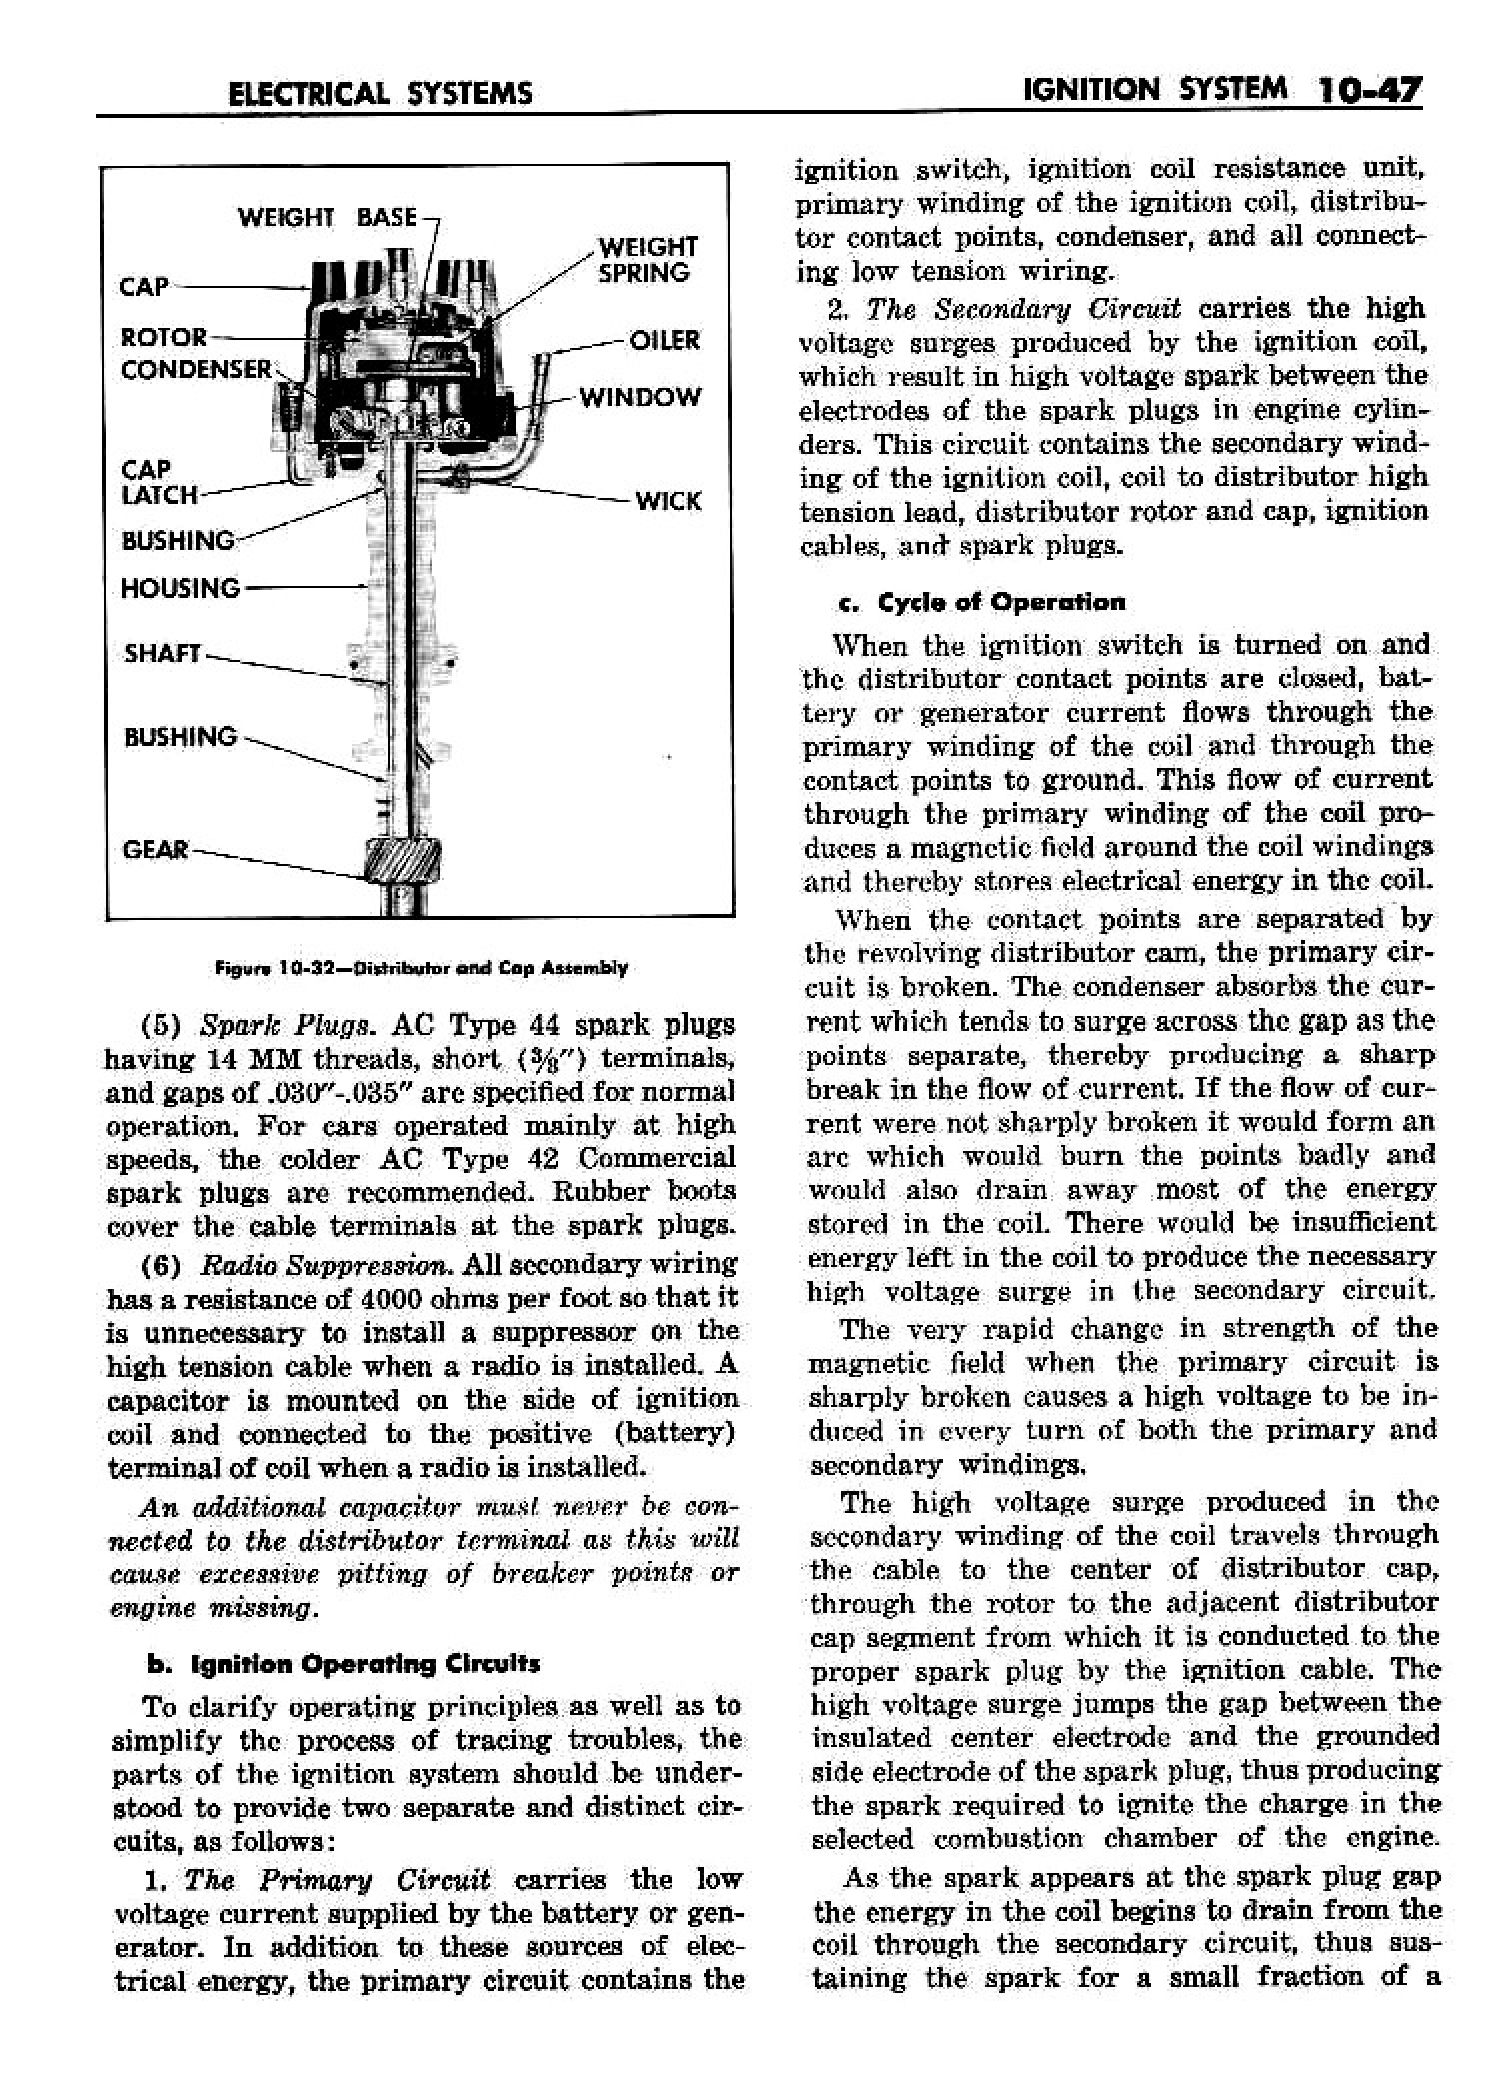 n_11 1958 Buick Shop Manual - Electrical Systems_47.jpg